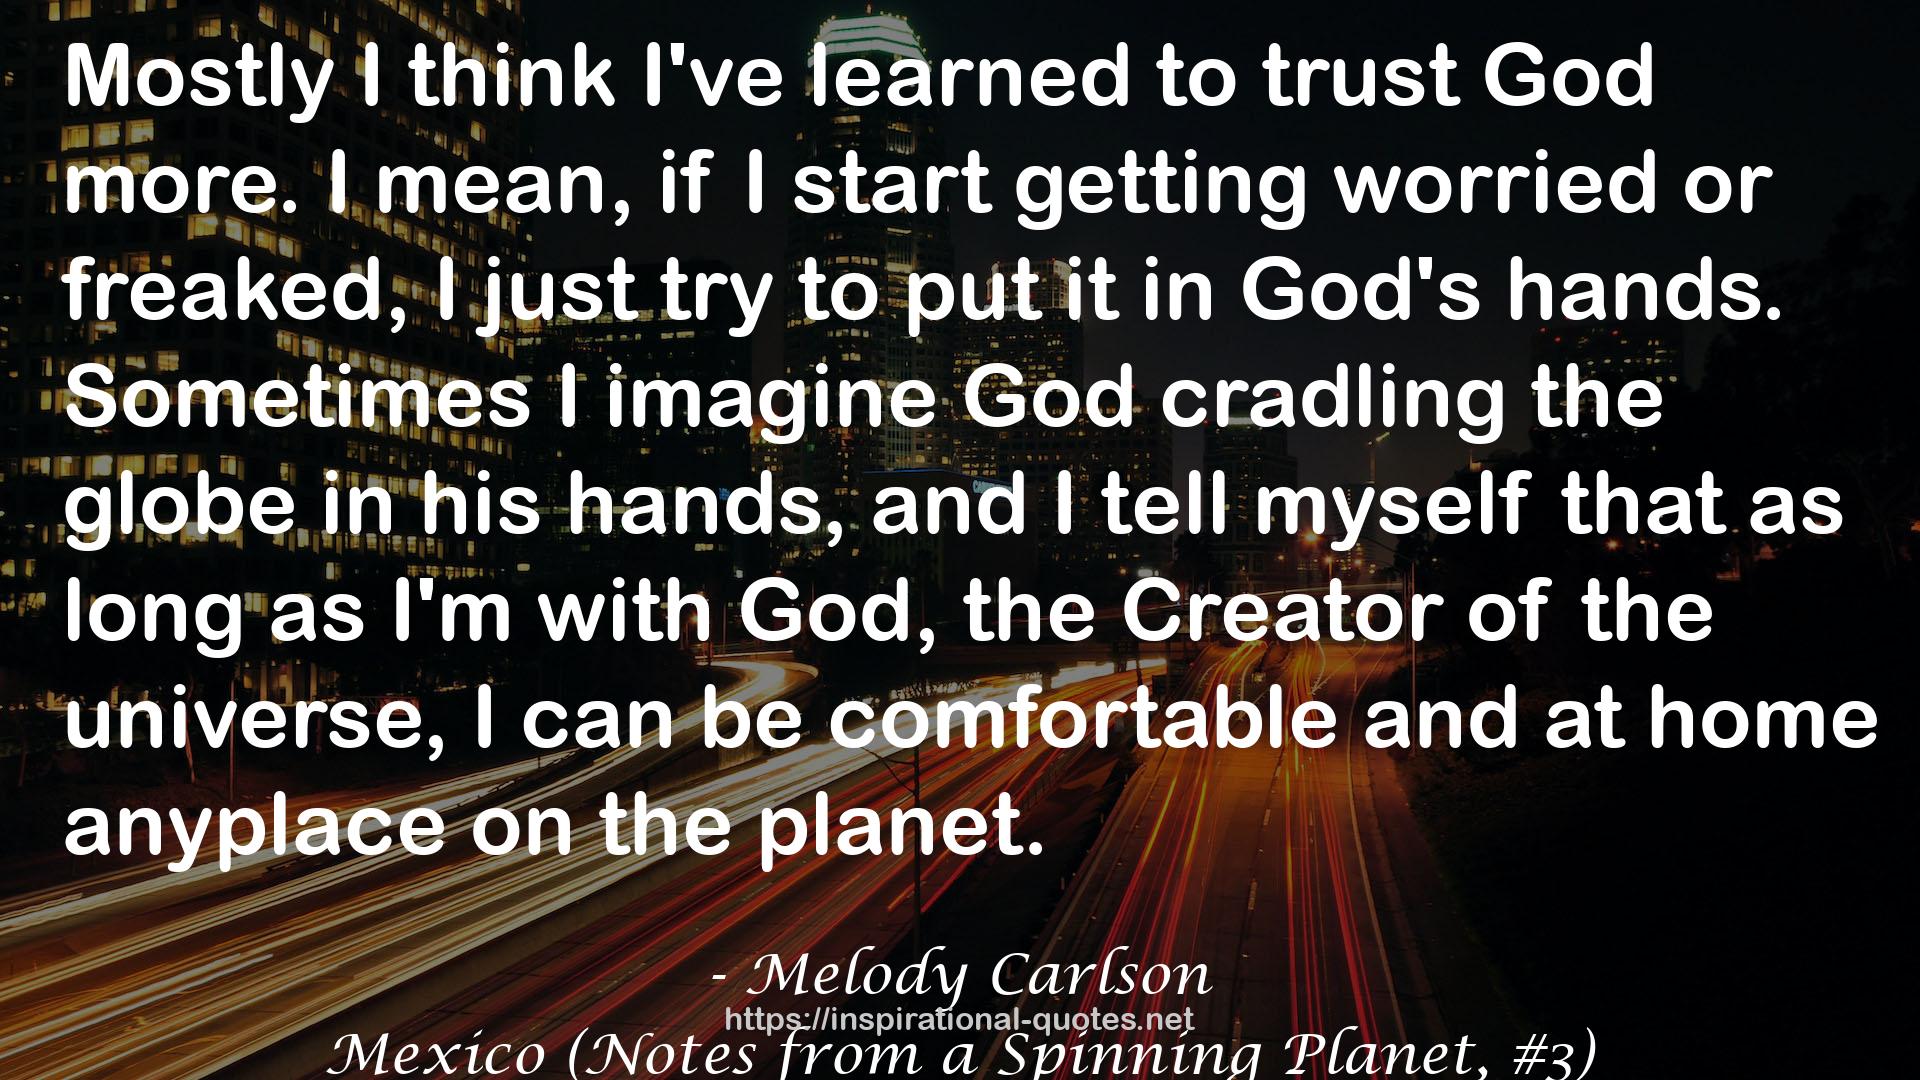 Mexico (Notes from a Spinning Planet, #3) QUOTES